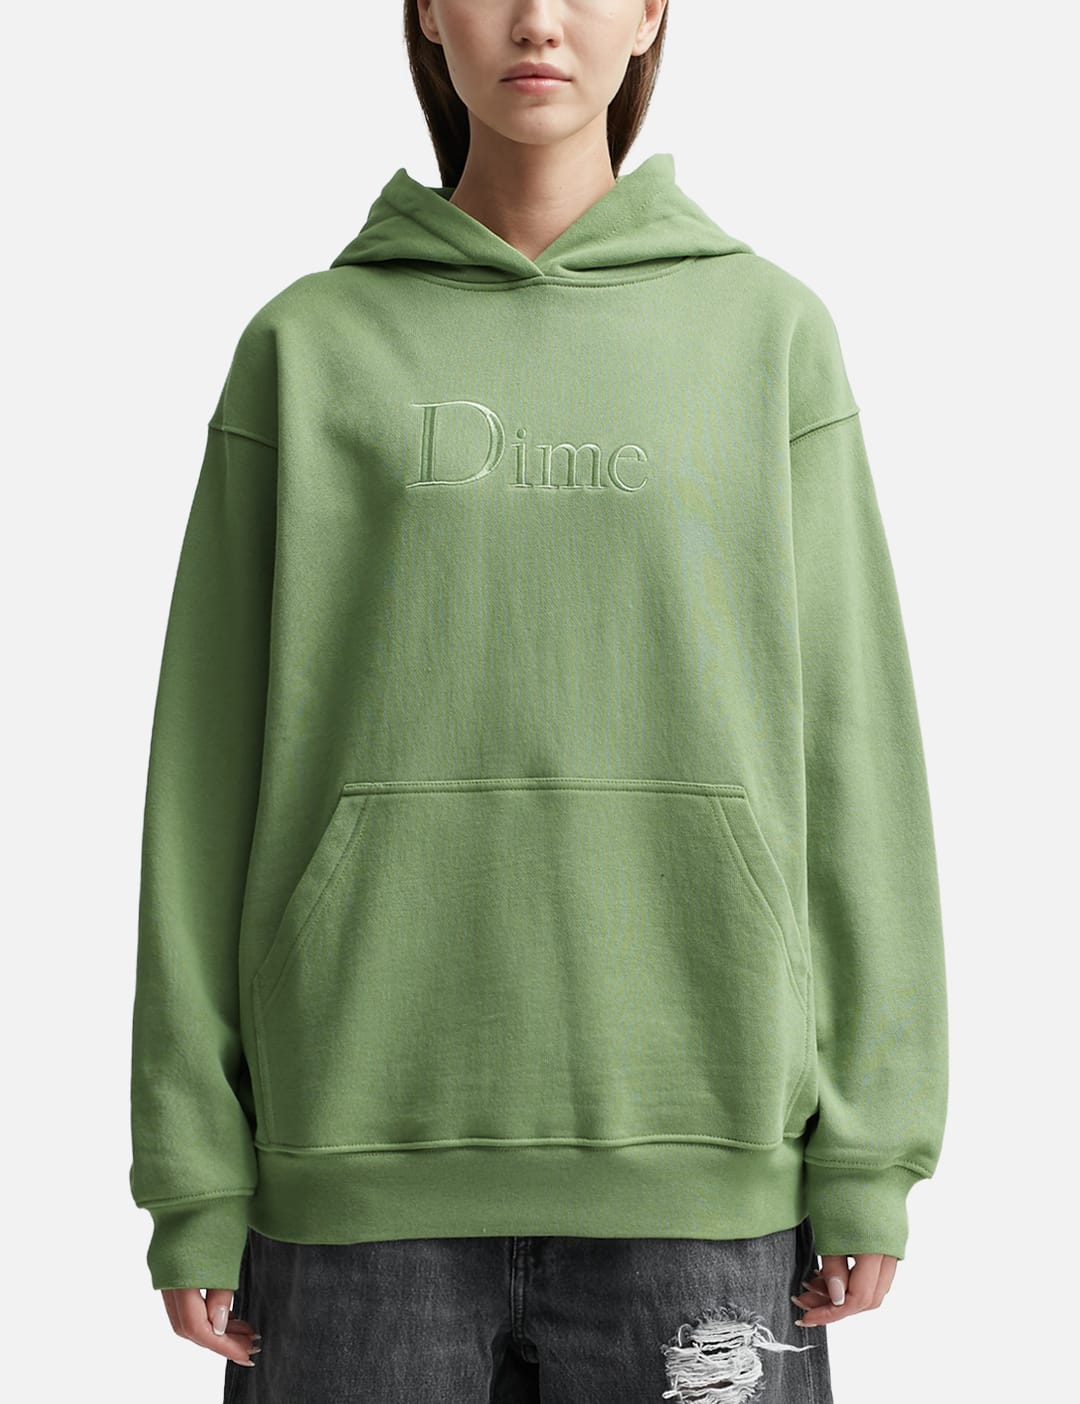 Dime - Dime Classic Logo Hoodie | HBX - Globally Curated Fashion